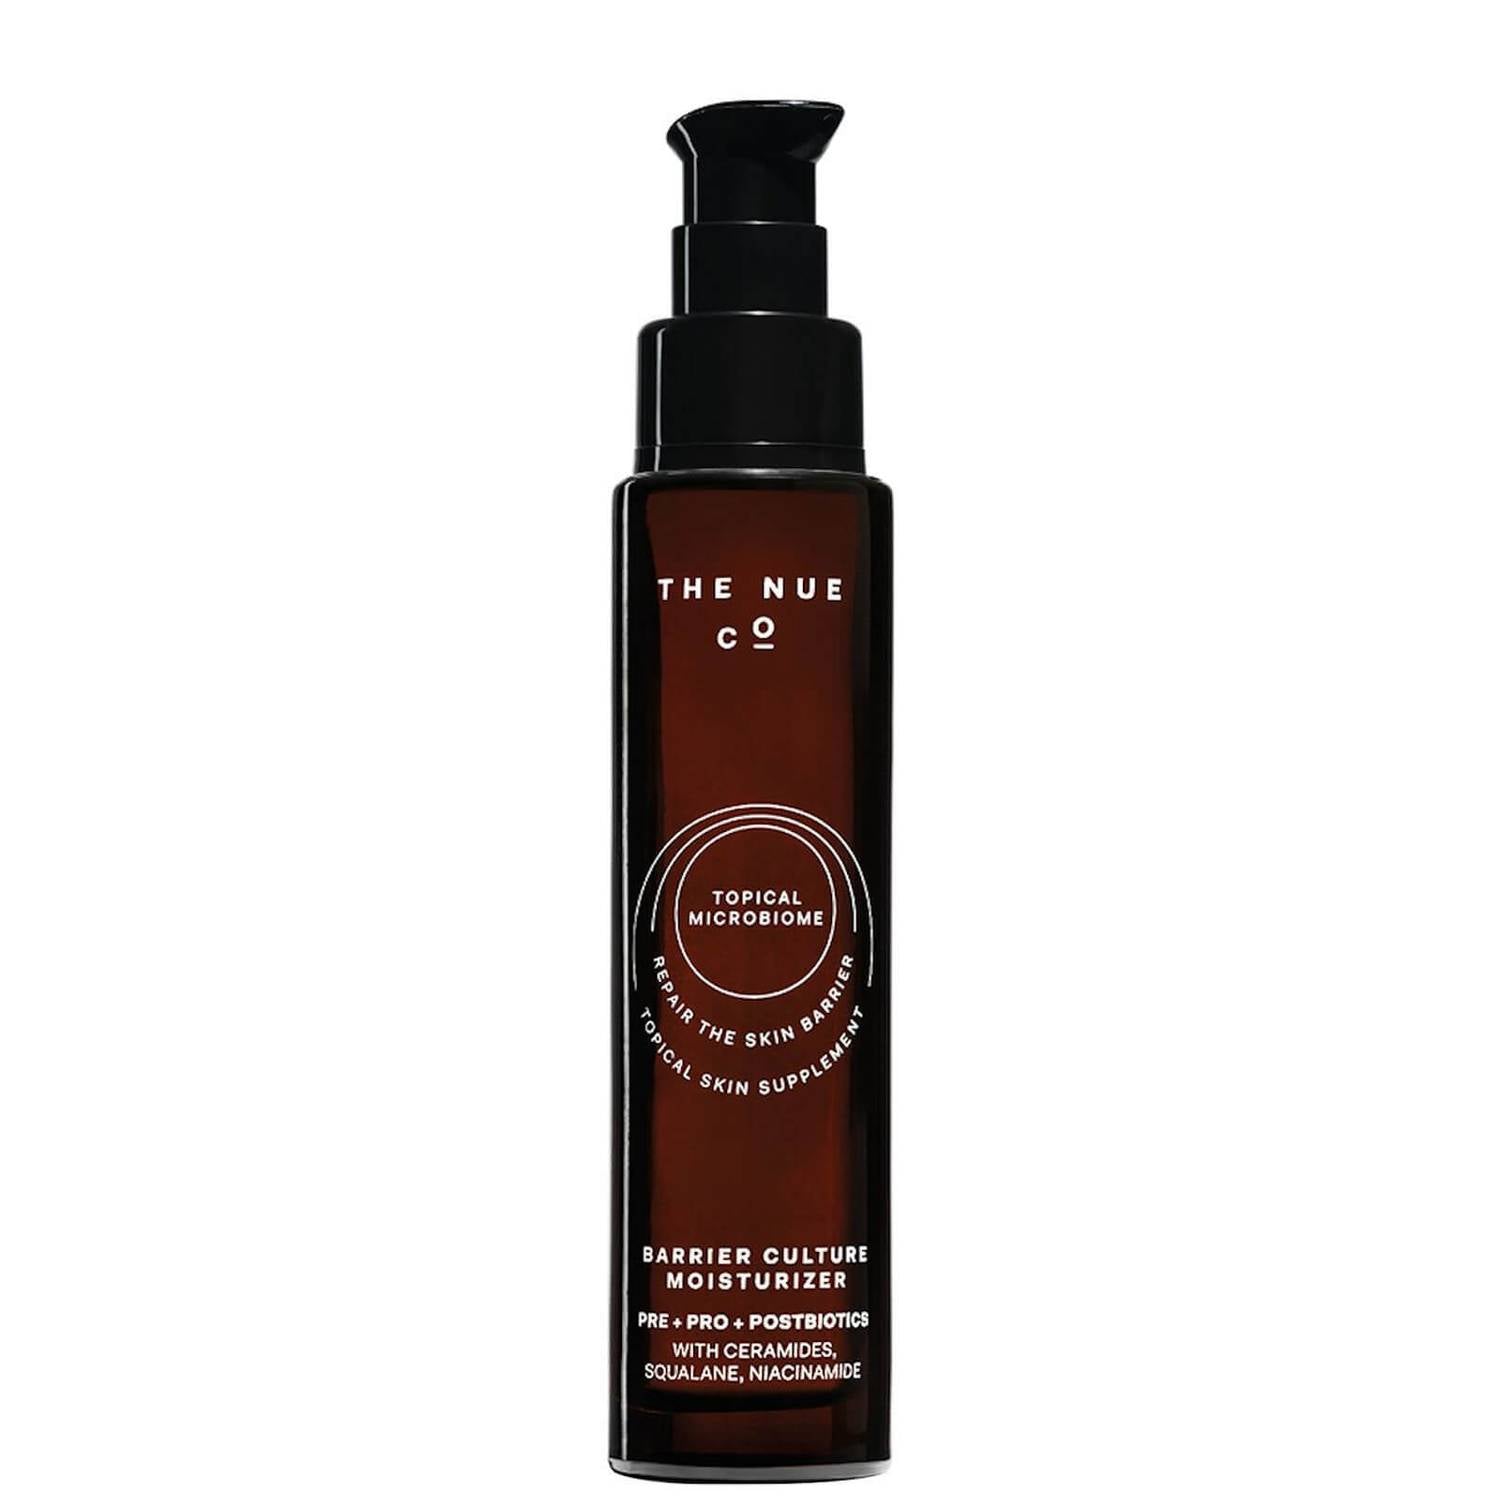 Barrier Culture Moisturizer Packaged In a Luxurious Brown Bottle With Pump Dispenser